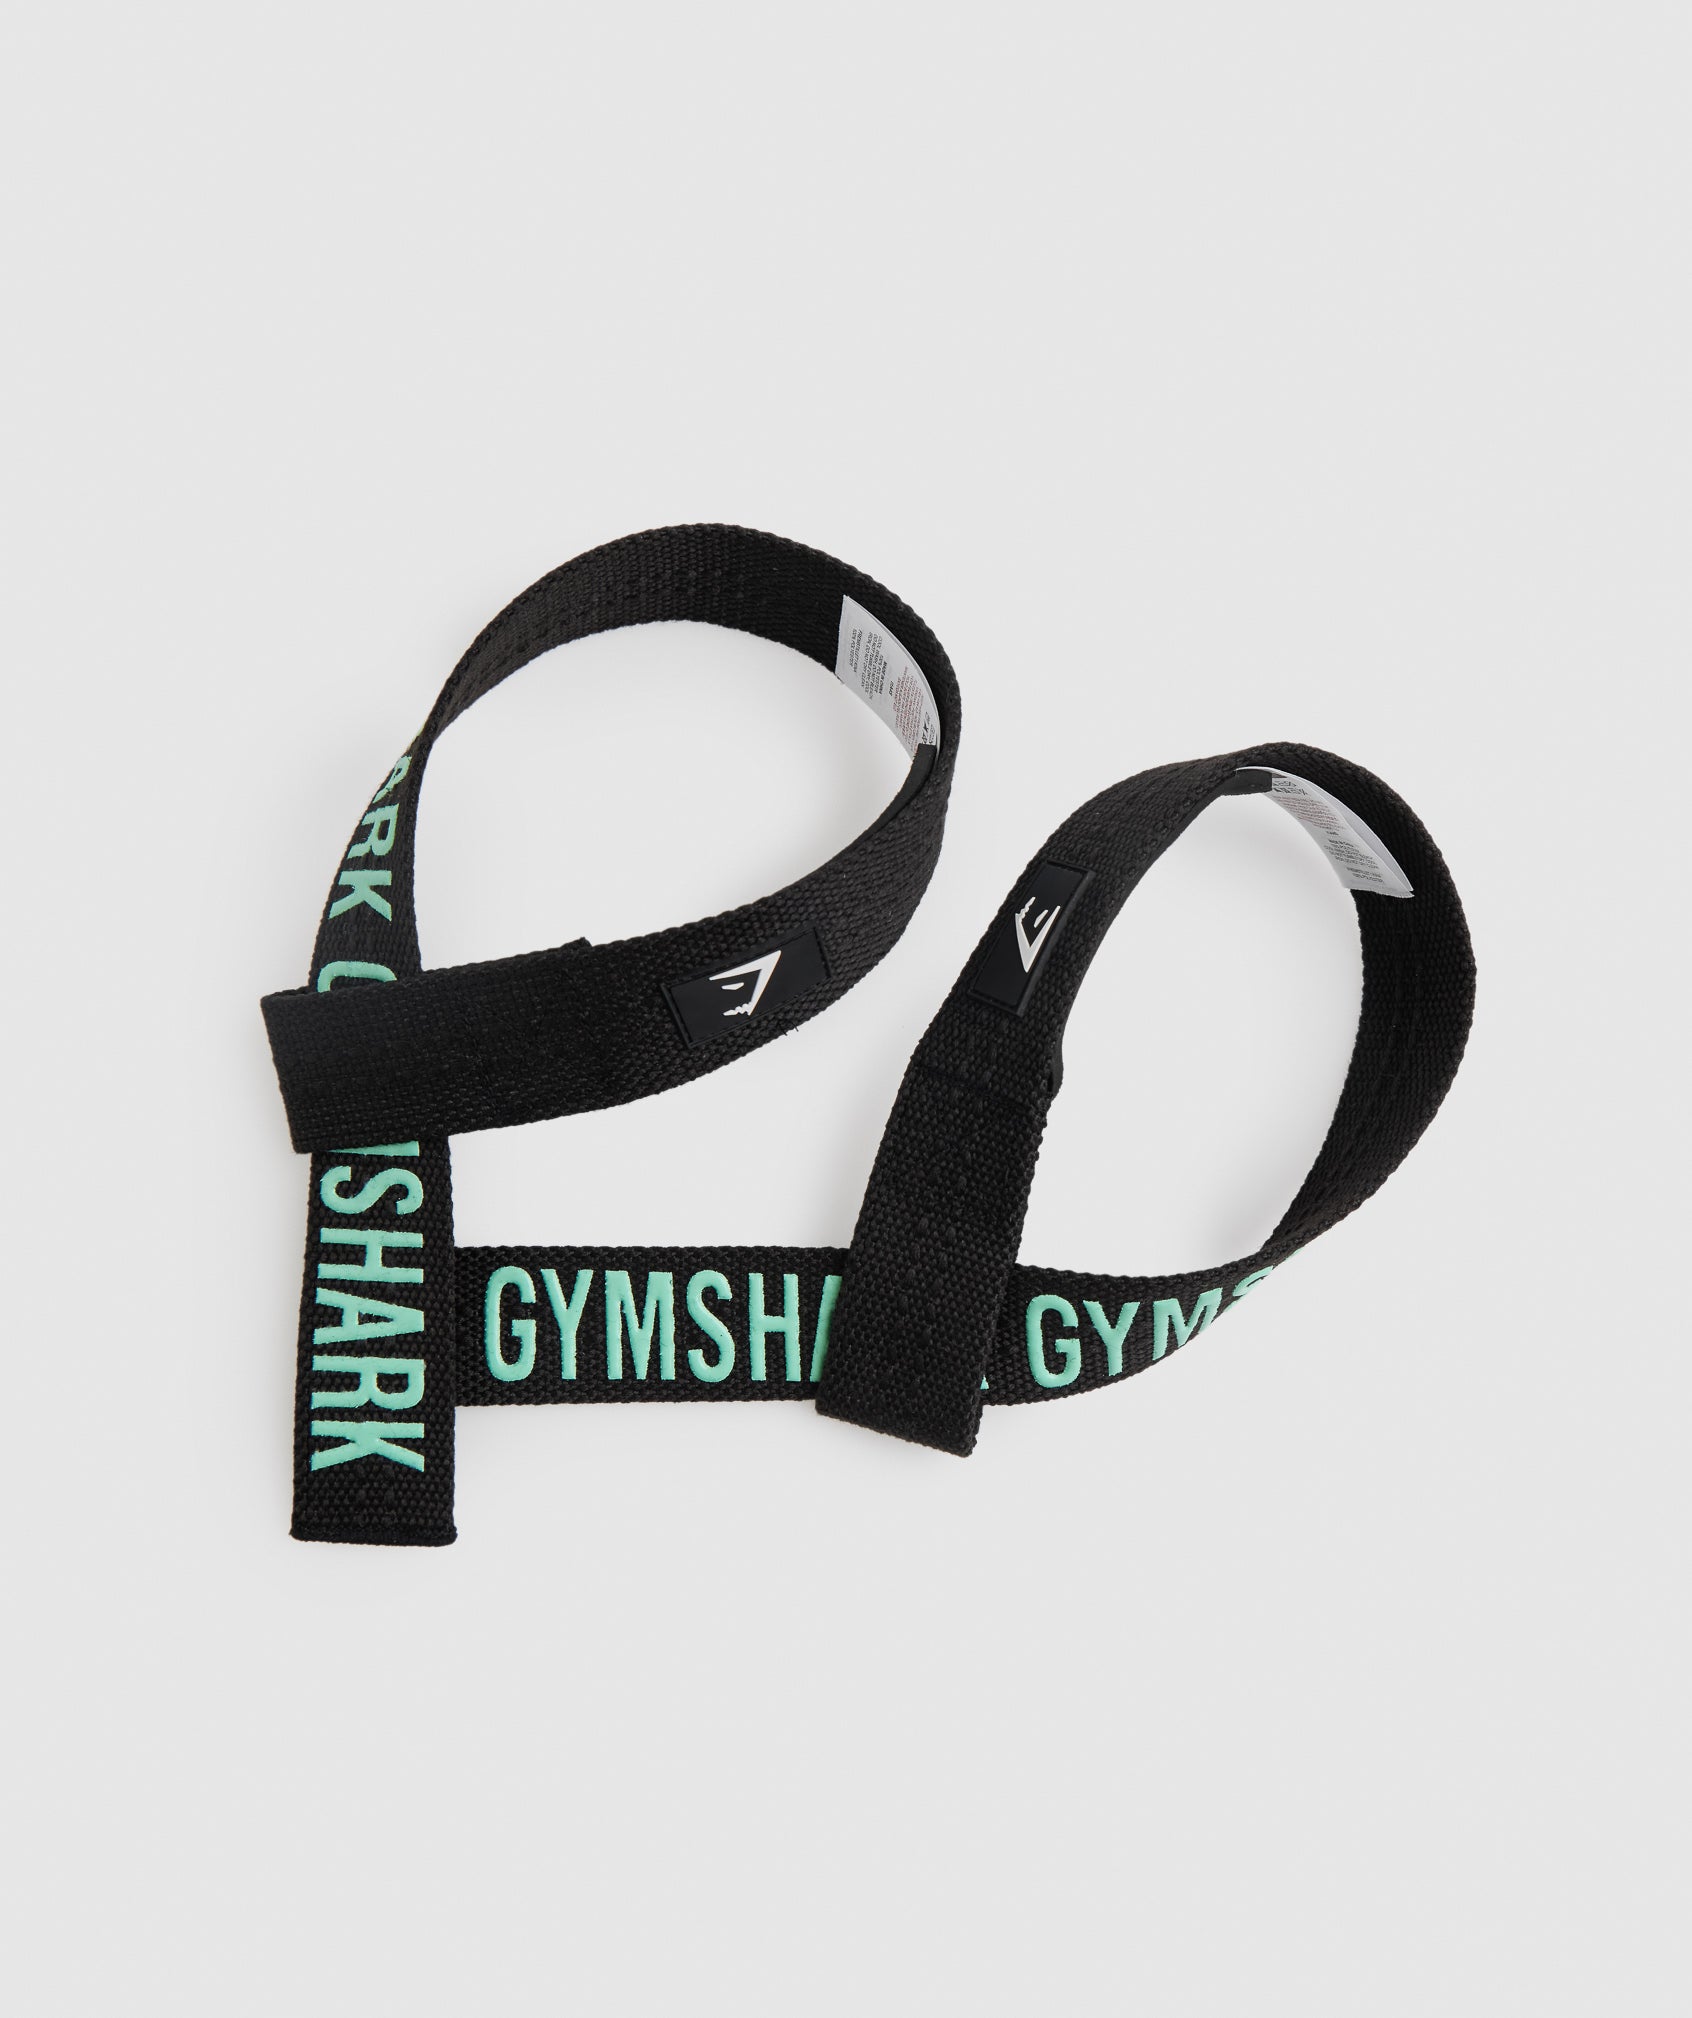 Best Selling Shopify Products on de.gymshark.com-4